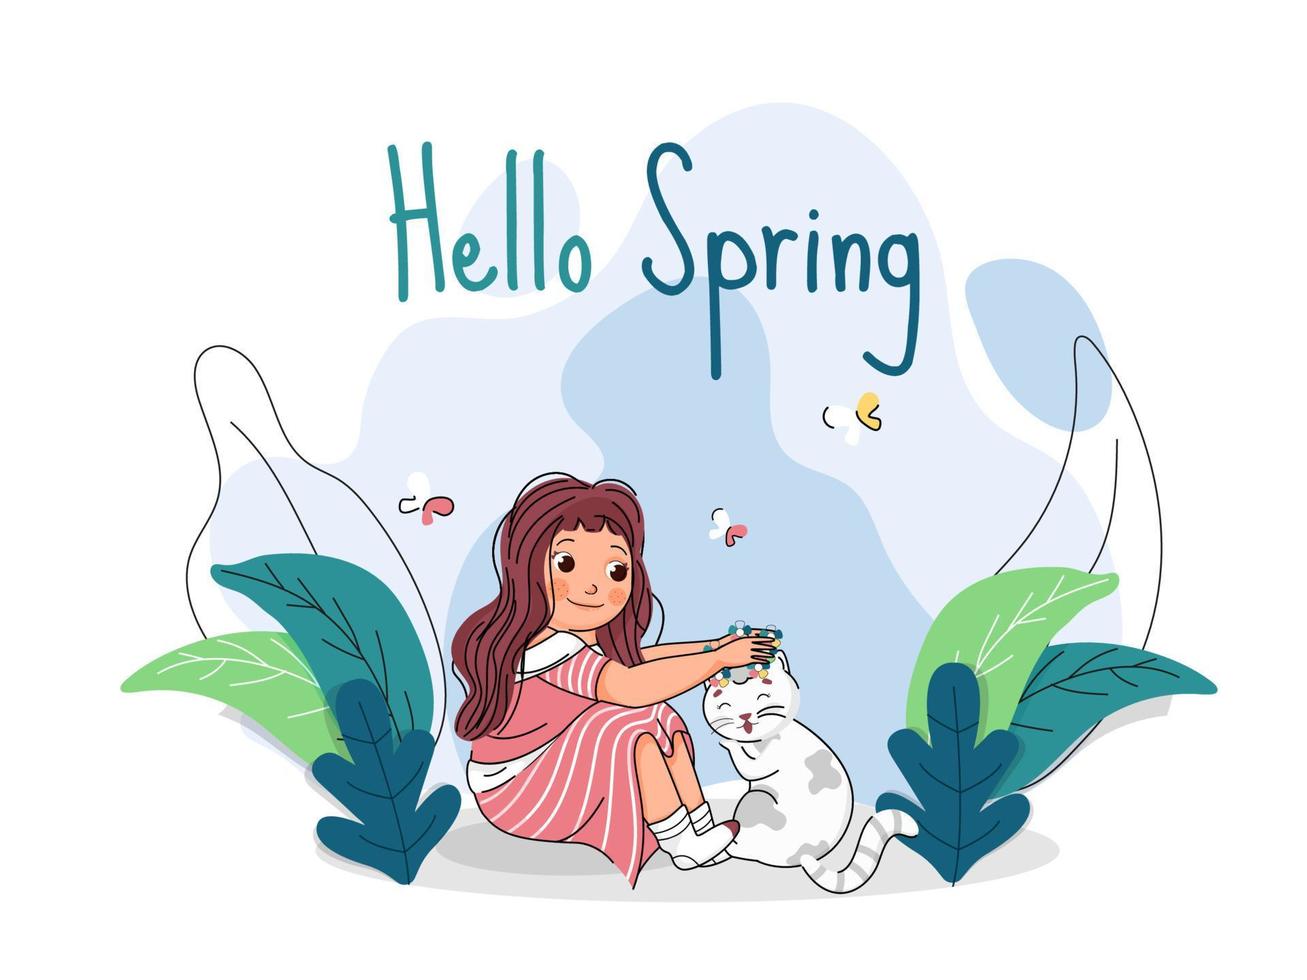 Hello Spring Text with Little Girl holding Flowers and Cat, Butterflies on Green Leaves White Background. vector